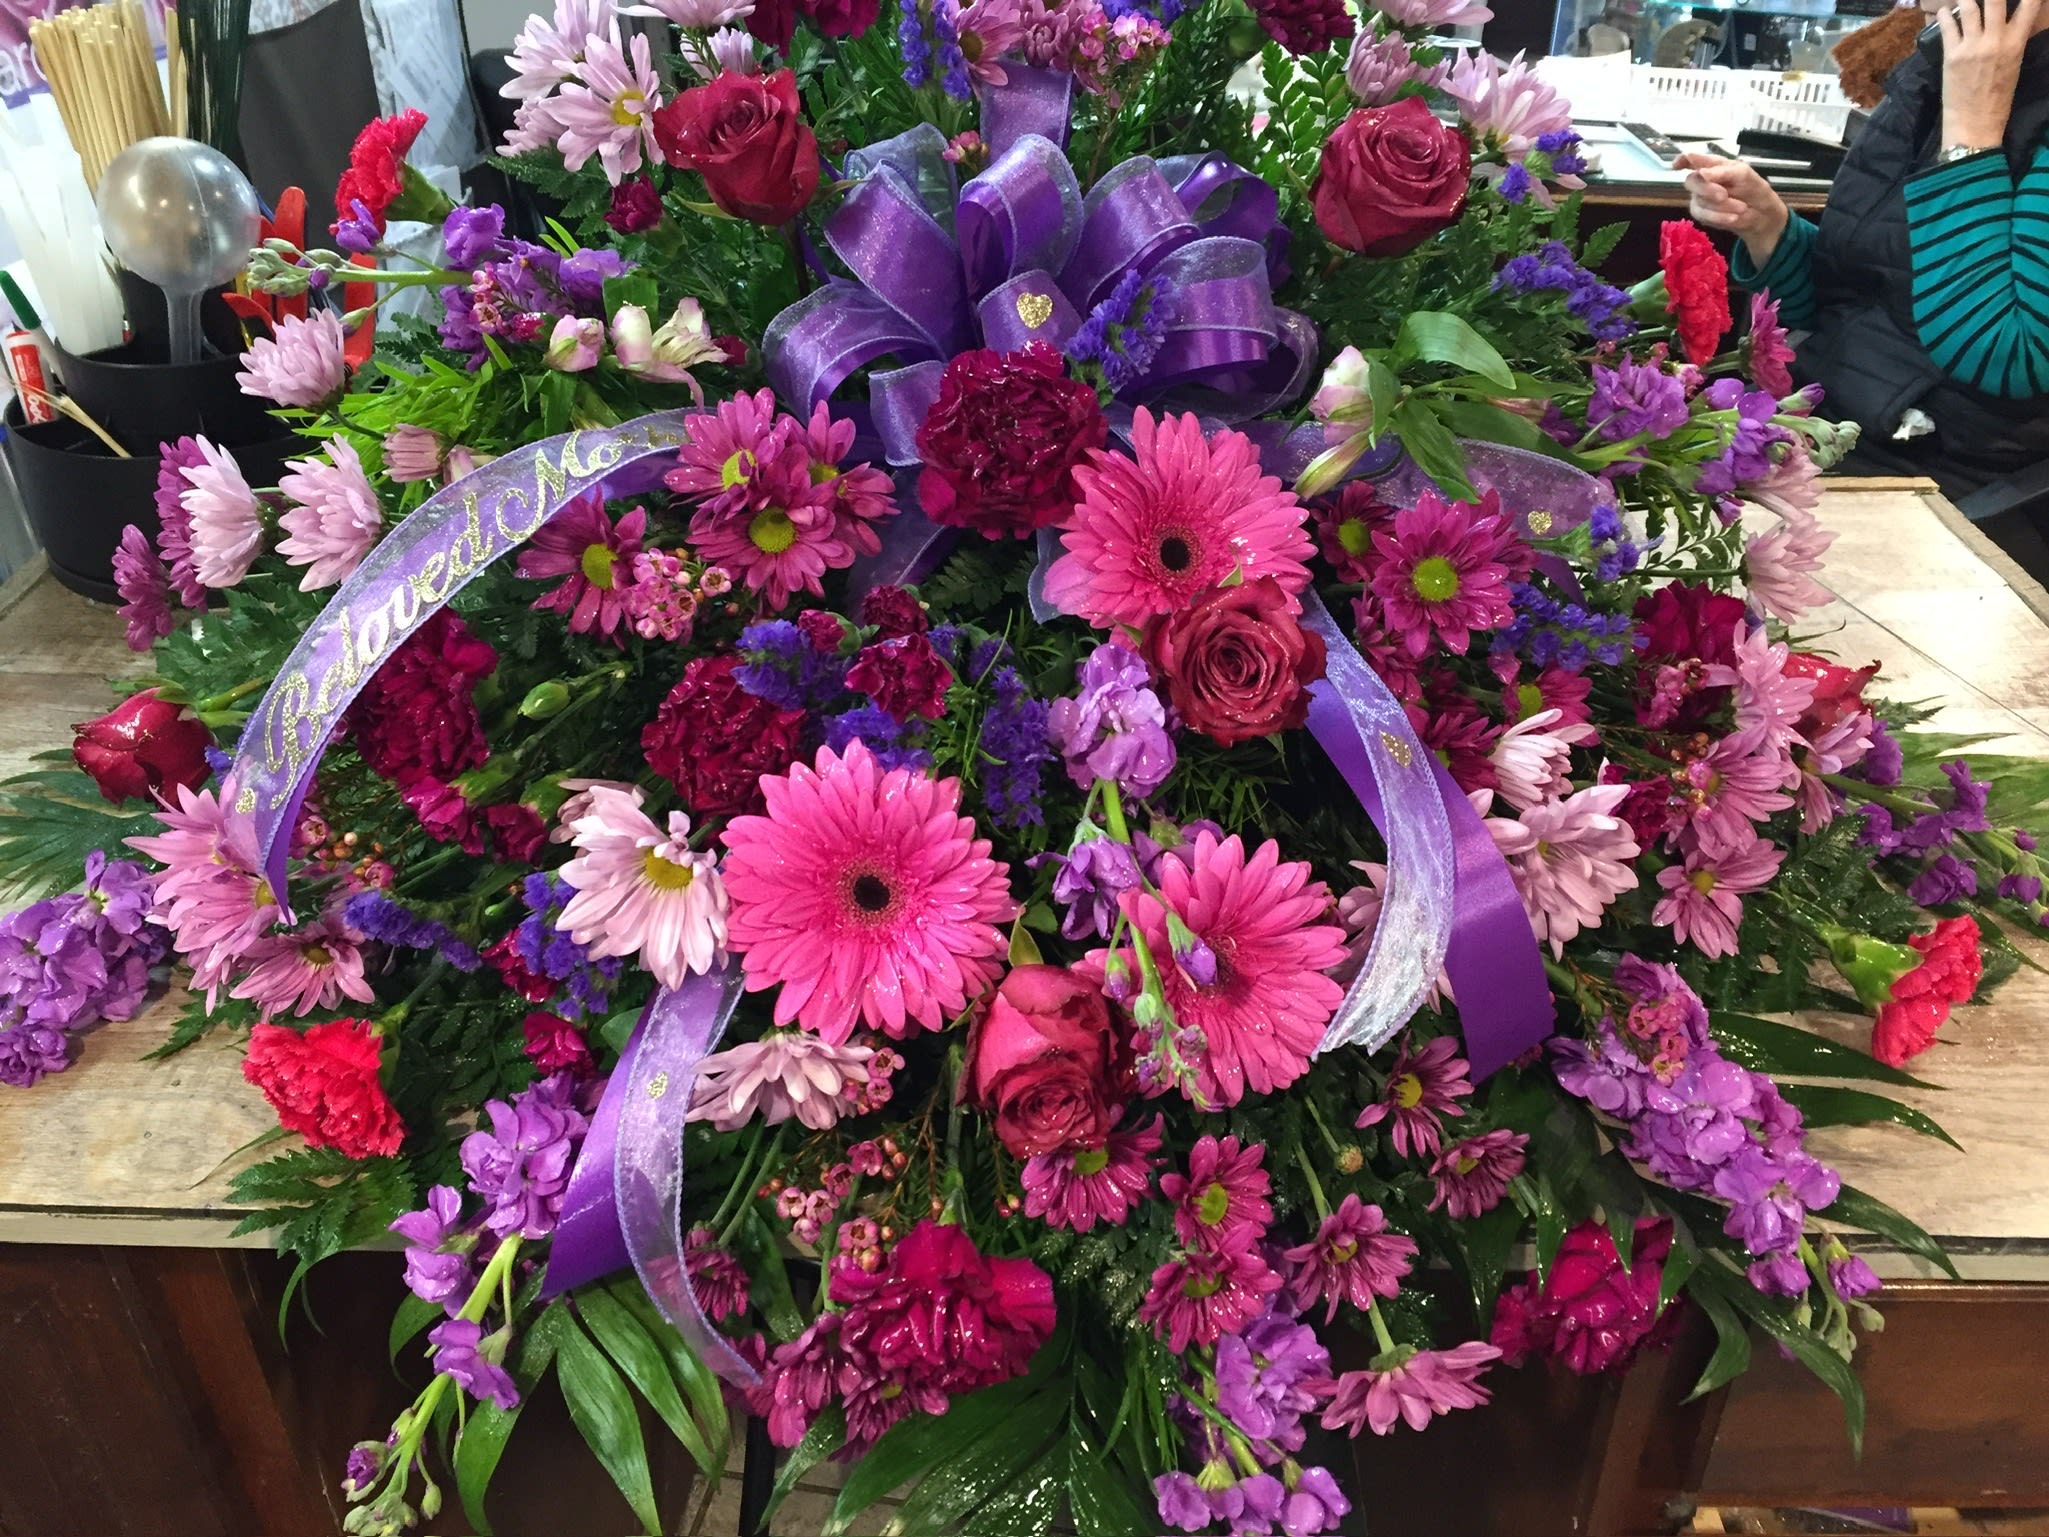 Purple paradise  - A beautiful display of hot pink and bright purple blooms 